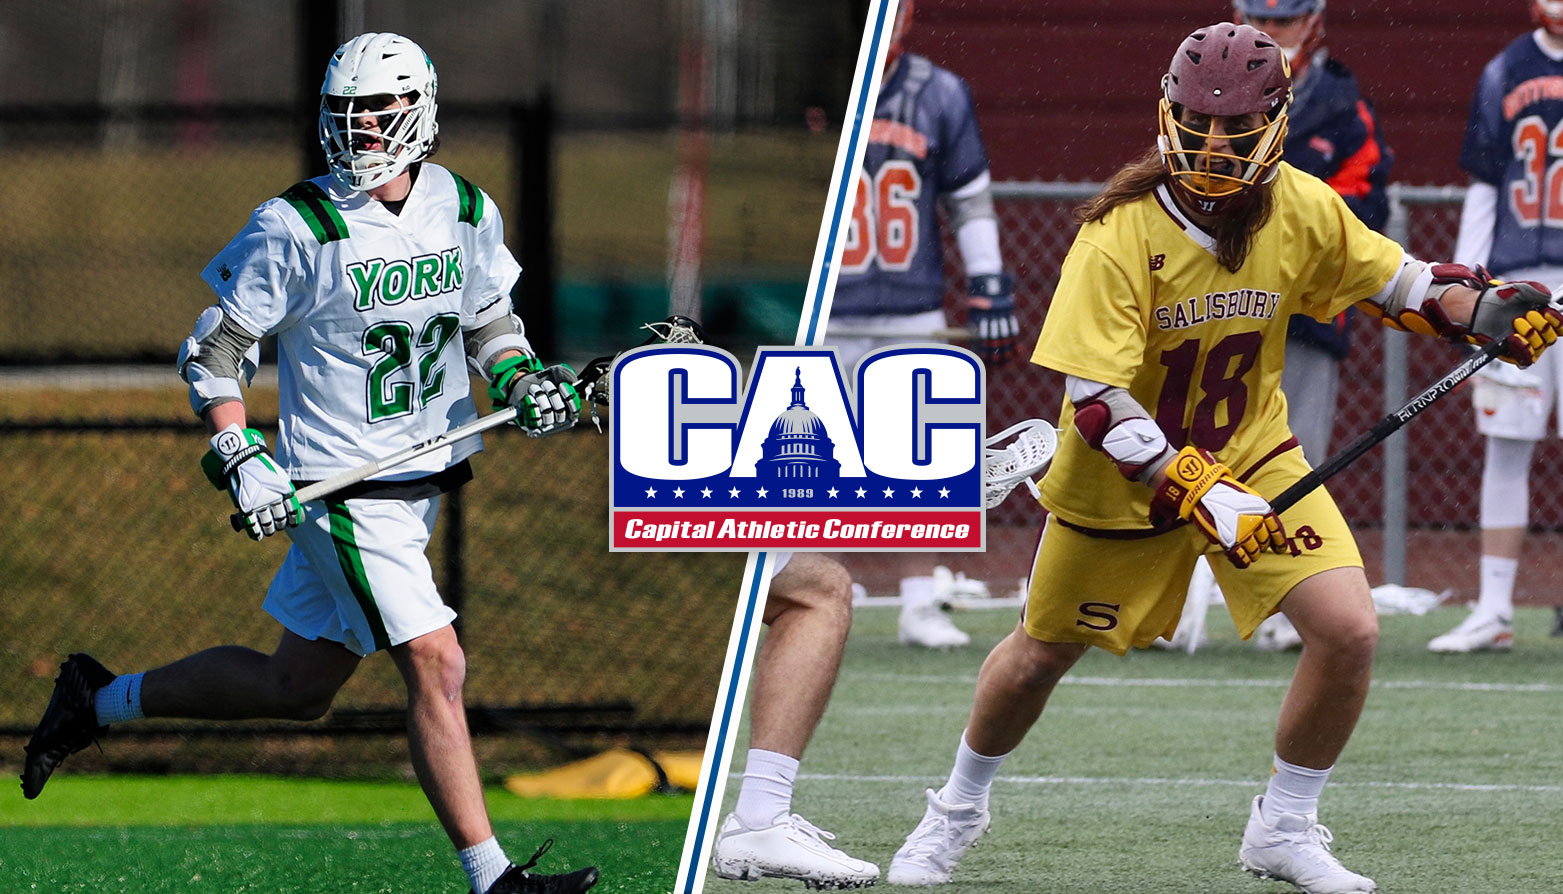 CAC Men's Lacrosse Tournament Matchups Set; York Lands Top Seed & First-Round Bye